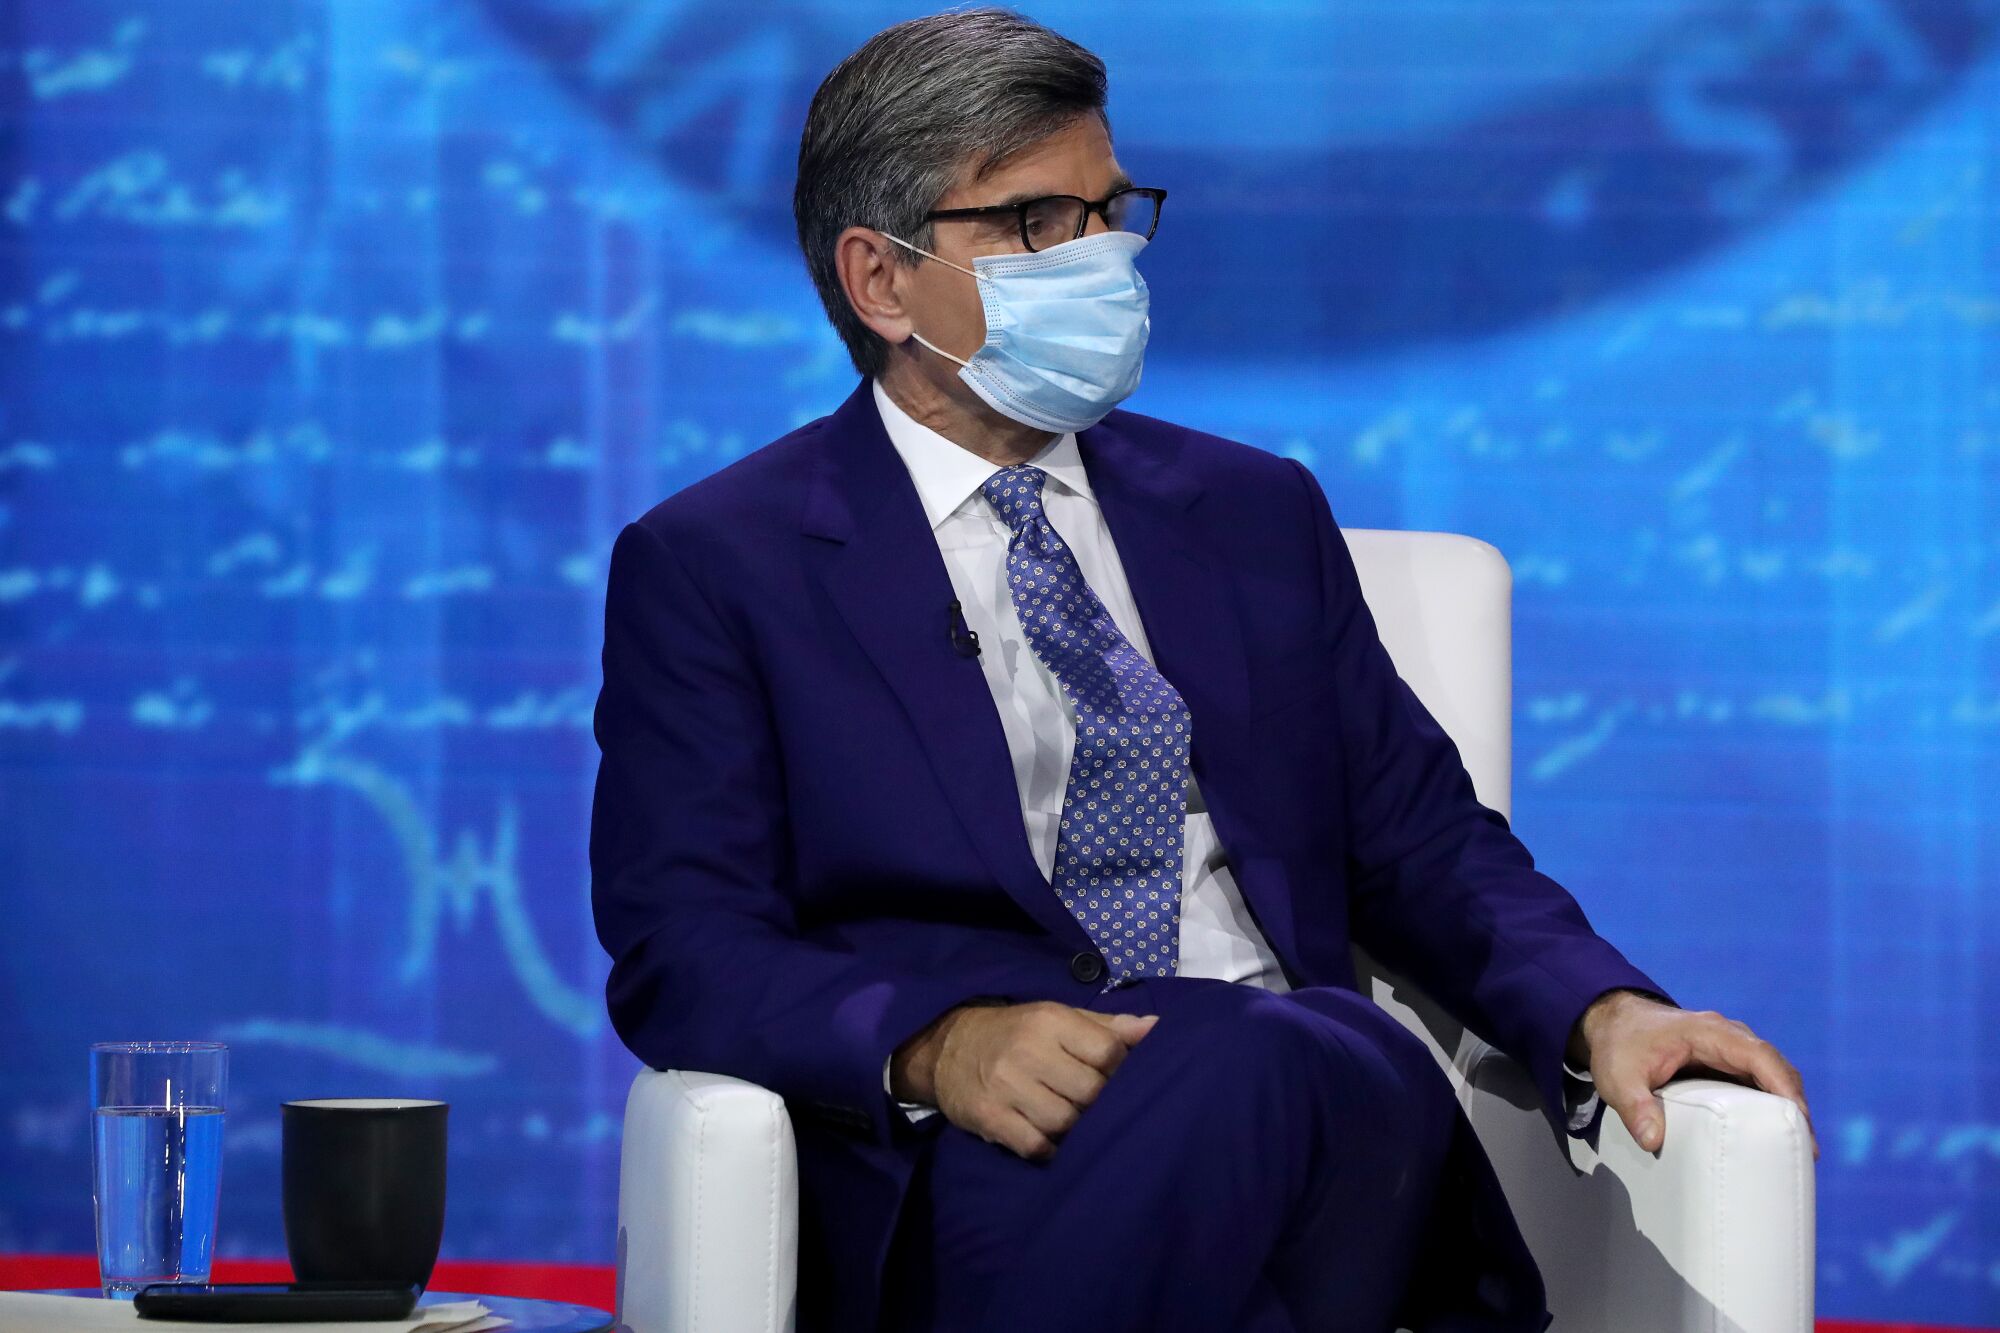 George Stephanopoulos in a mask on stage